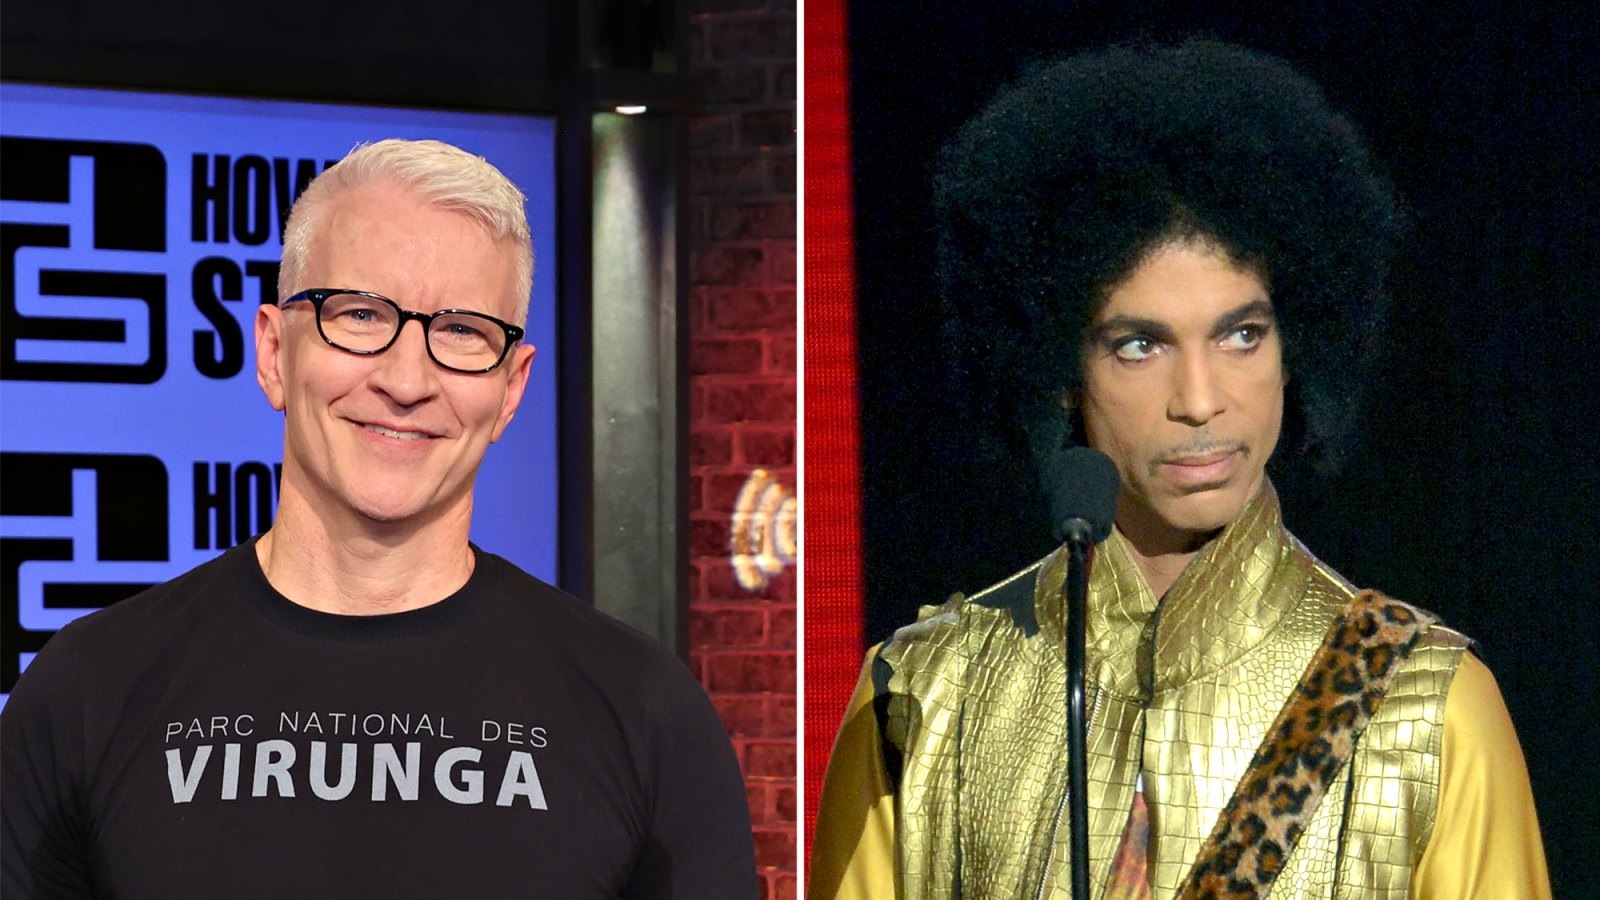 Anderson Cooper Reveals That Prince Once Asked Him to Explain the 2008 Financial Crash